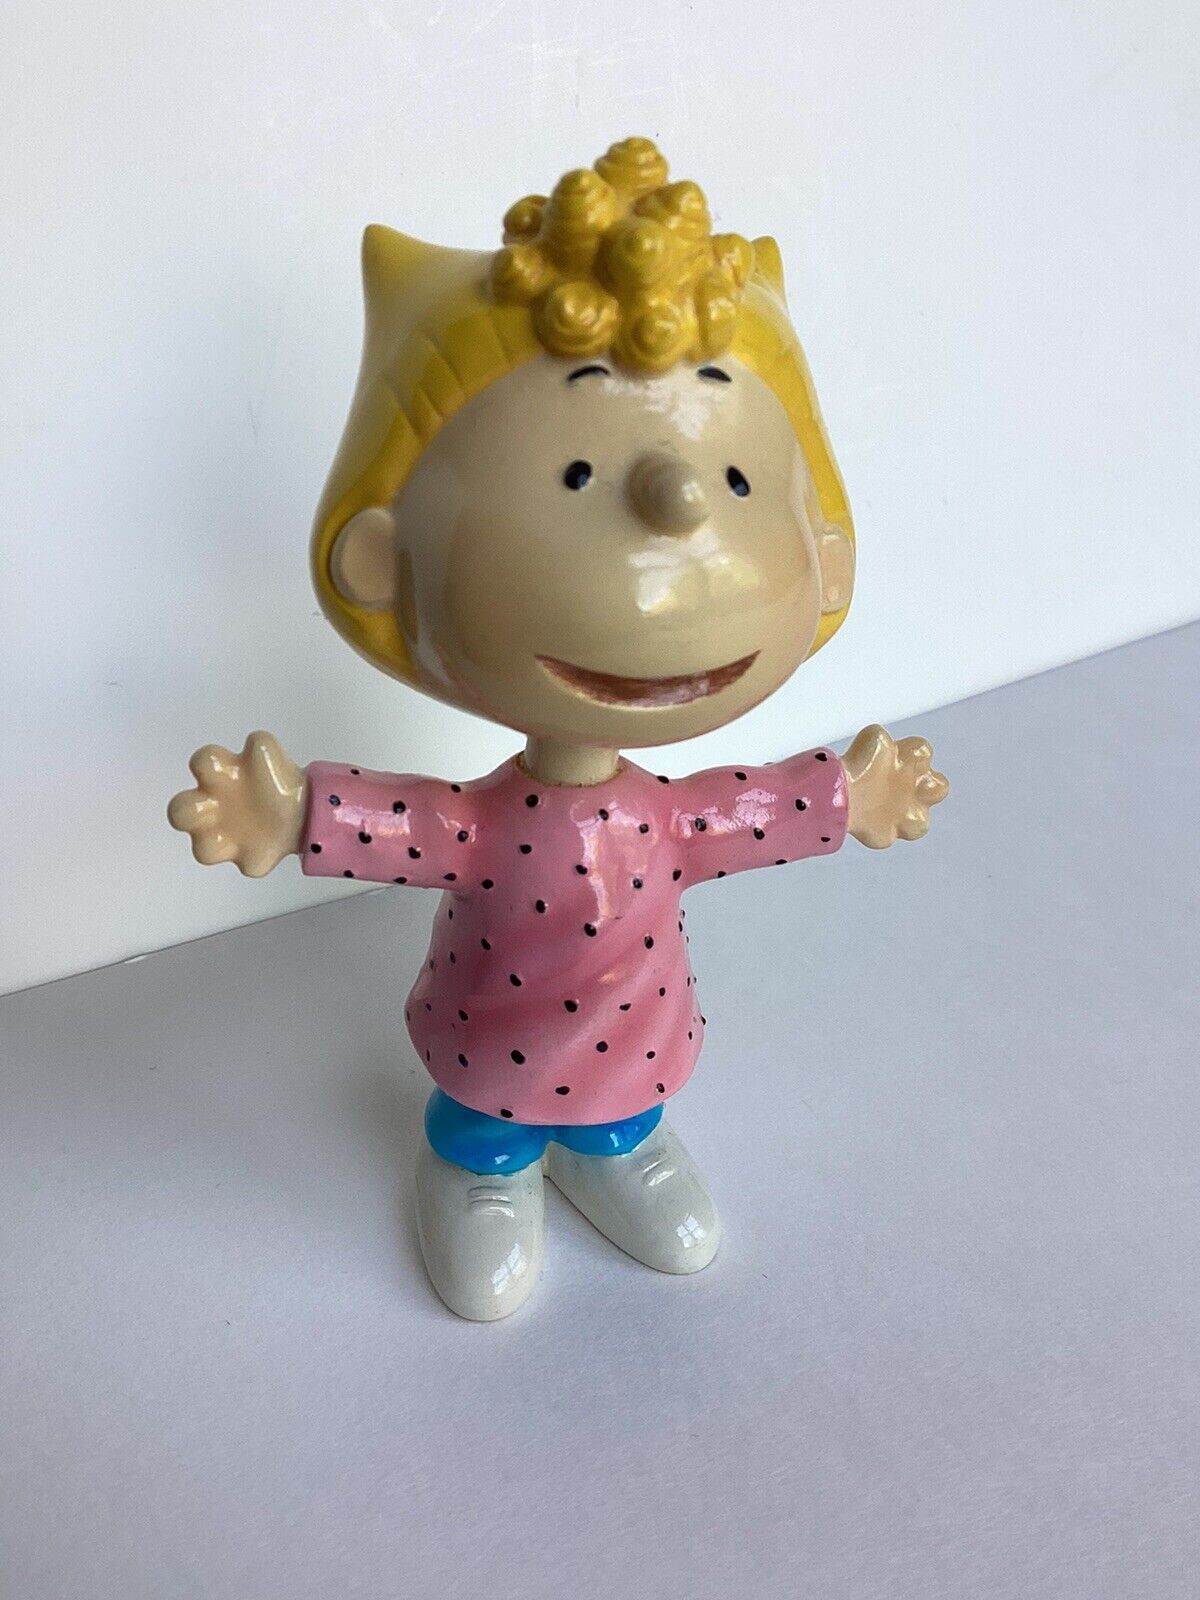 Westland Giftware Peanuts Collection Sally Figurine Porcelain 8149 3.5”